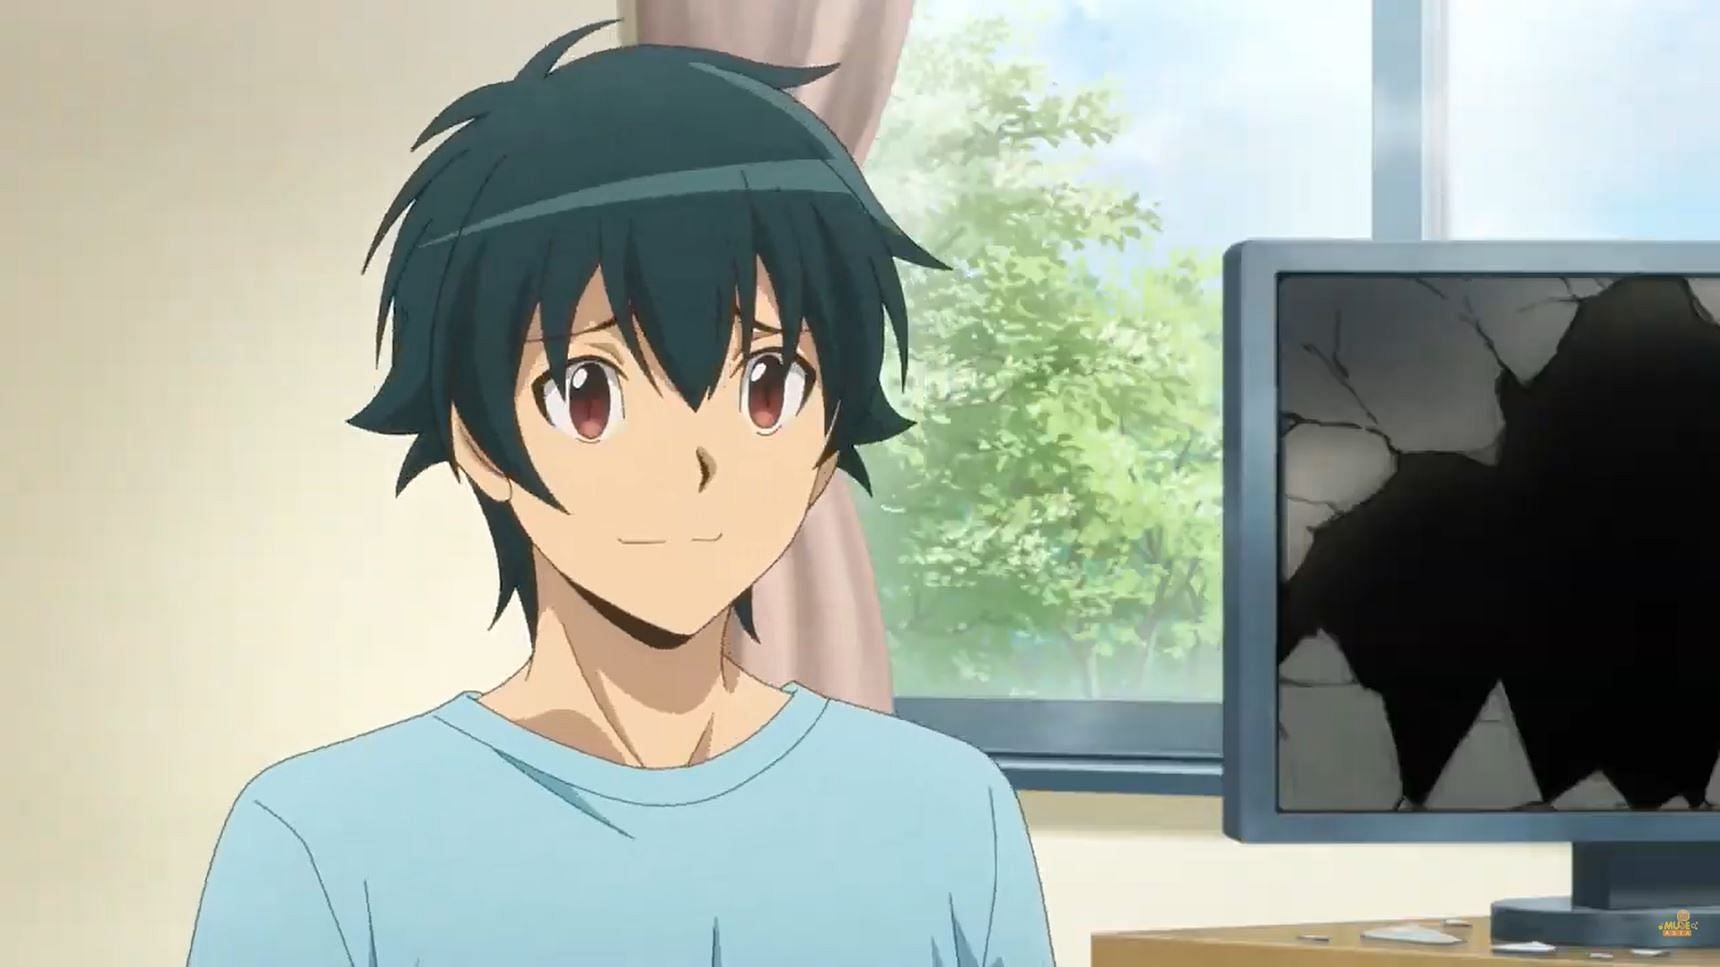 Maou Sadao speaking to Chiho in the hospital - The Devil is a Part-Timer!! (Image via Studio 3Hz)